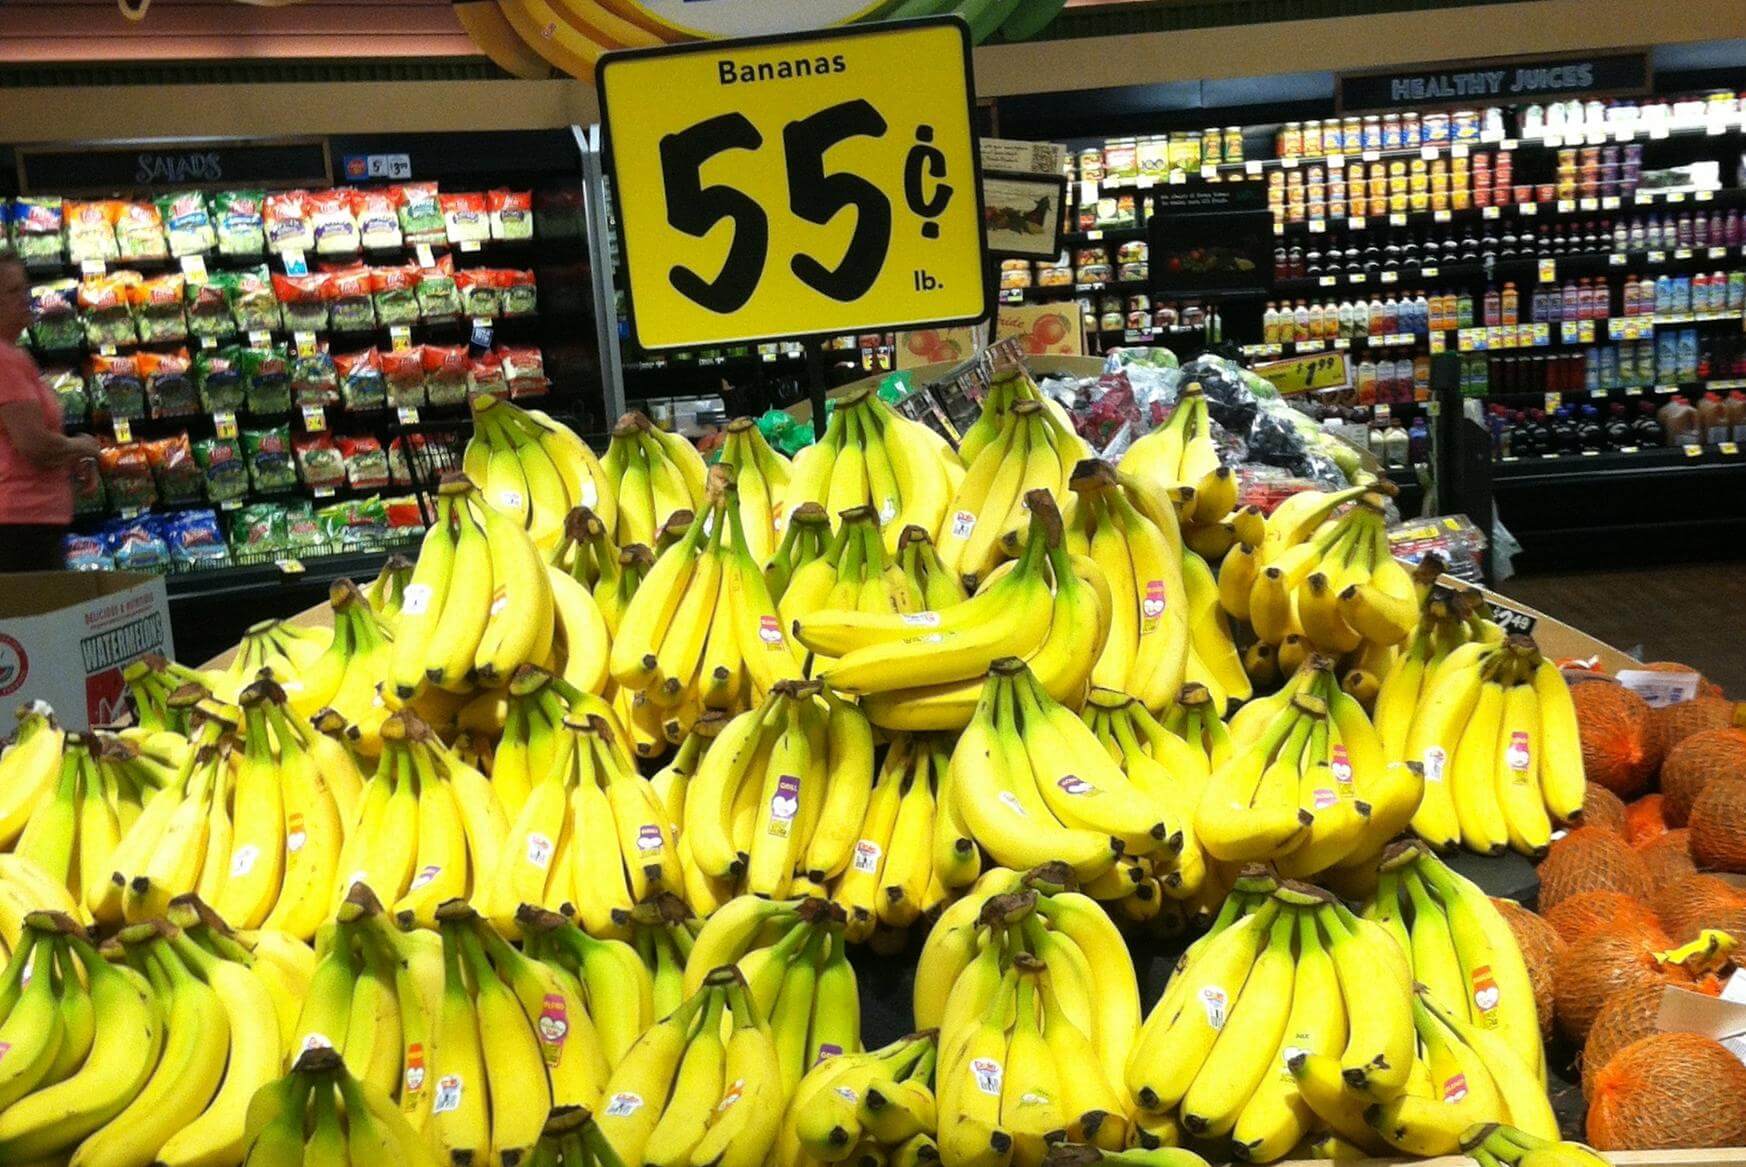 Can biotechnology defuse the looming 'bananapocalypse'? - Genetic